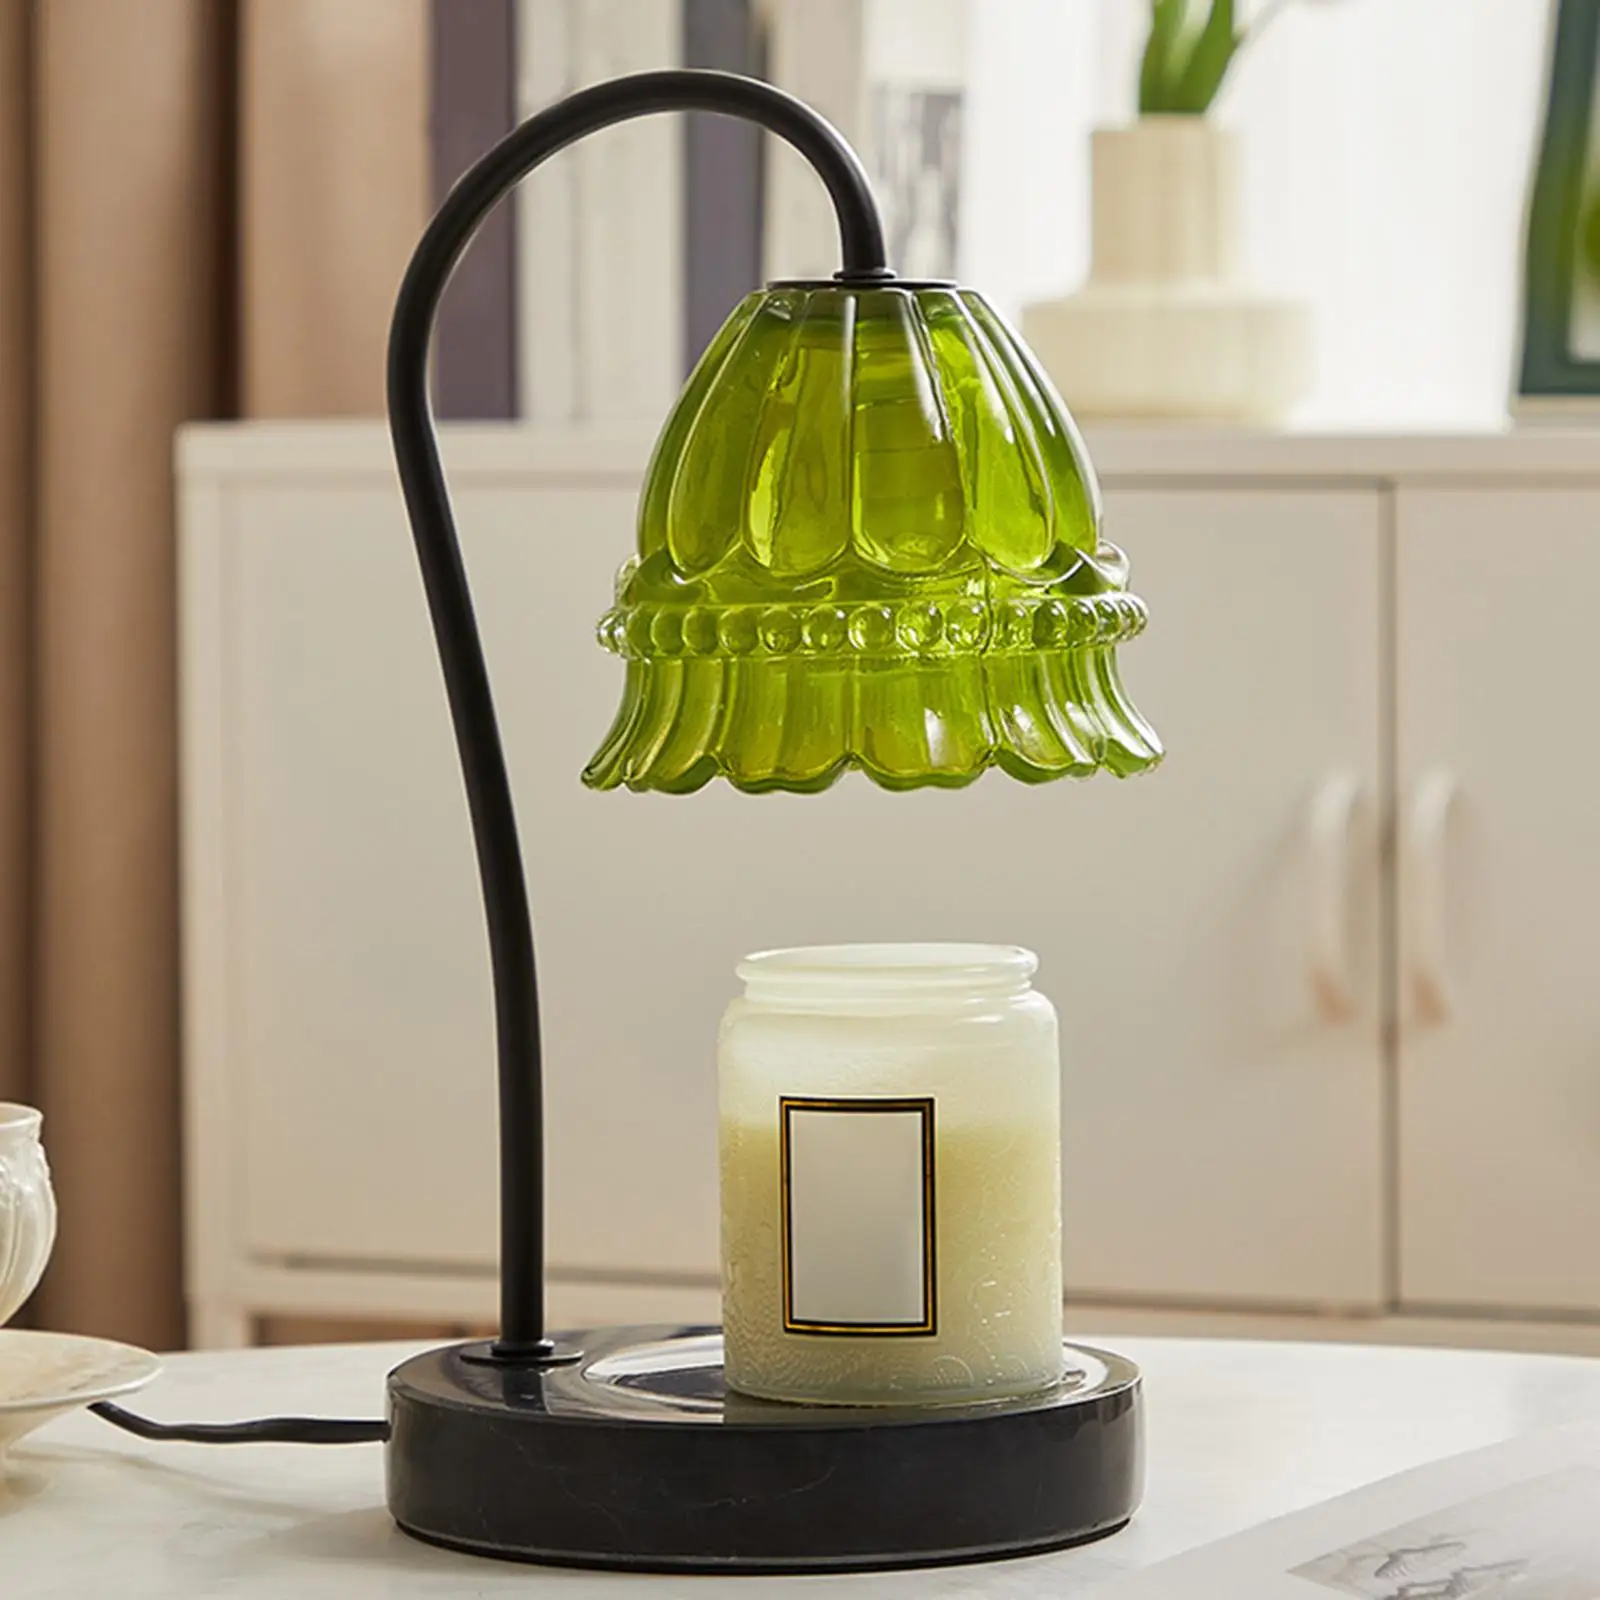 European Style Candle Warmer Lamp Dimmable for Bedroom Office Room Living